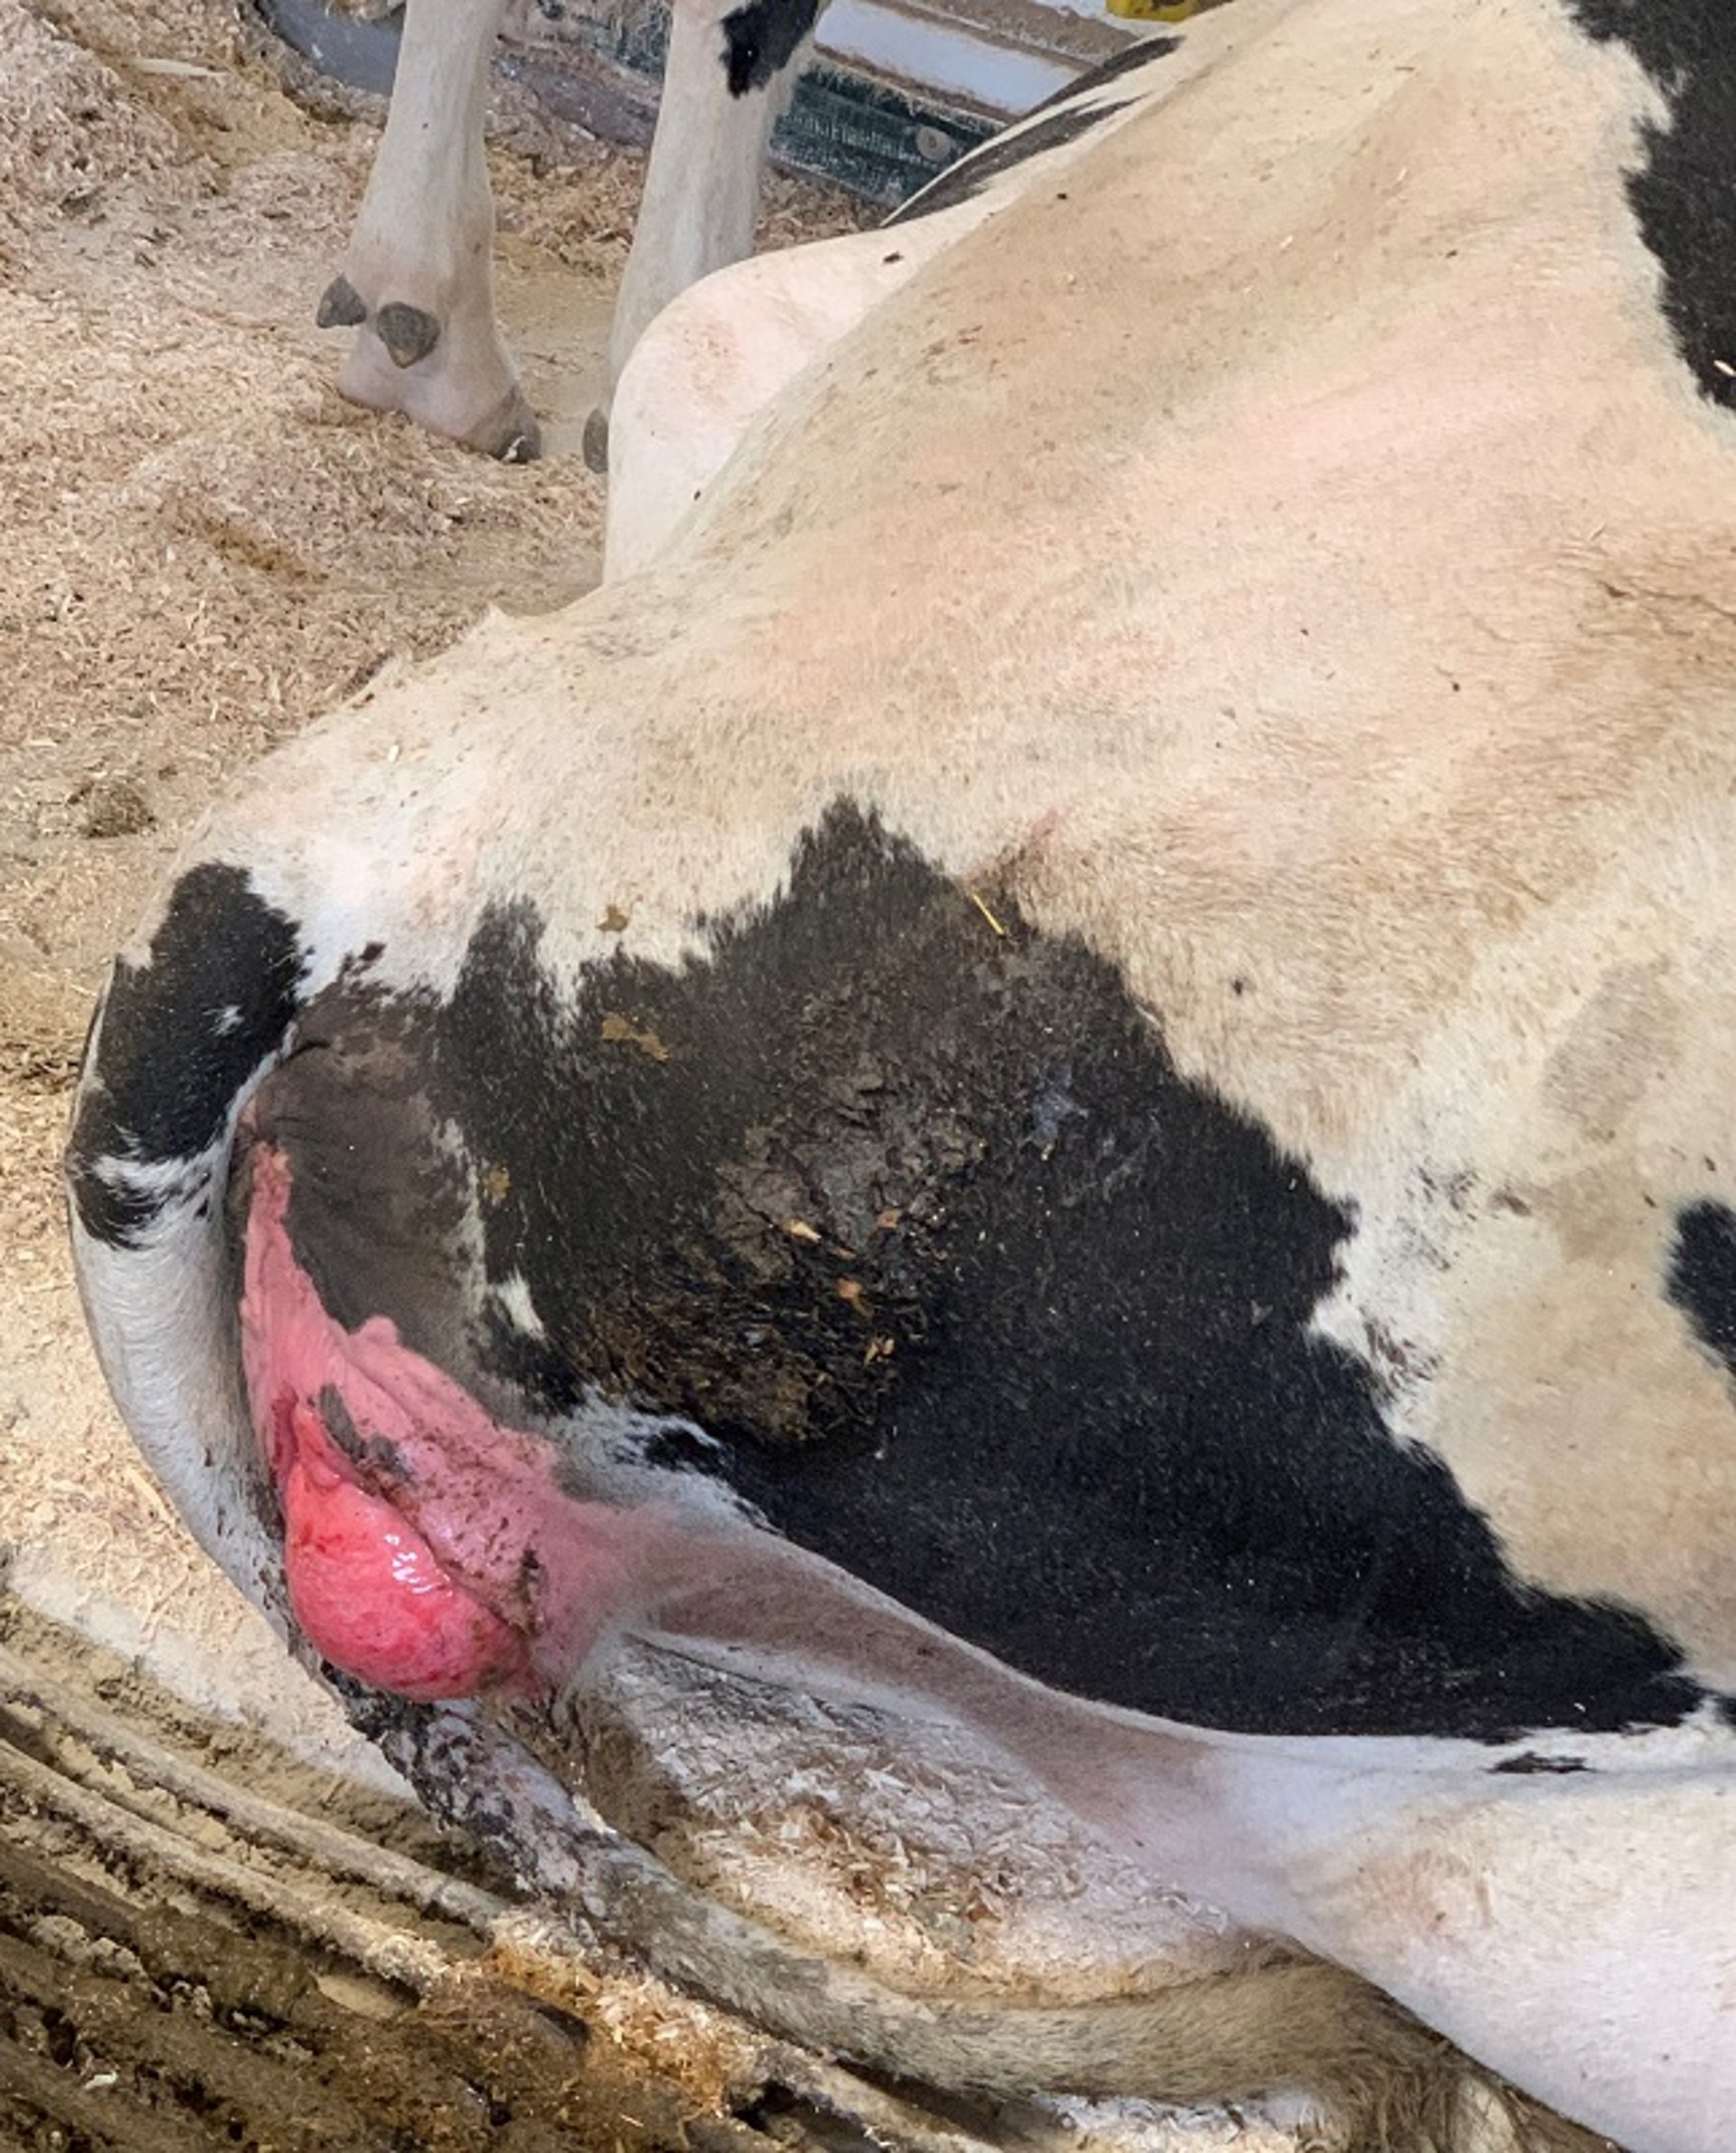 Vaginal prolapse in a dairy cow